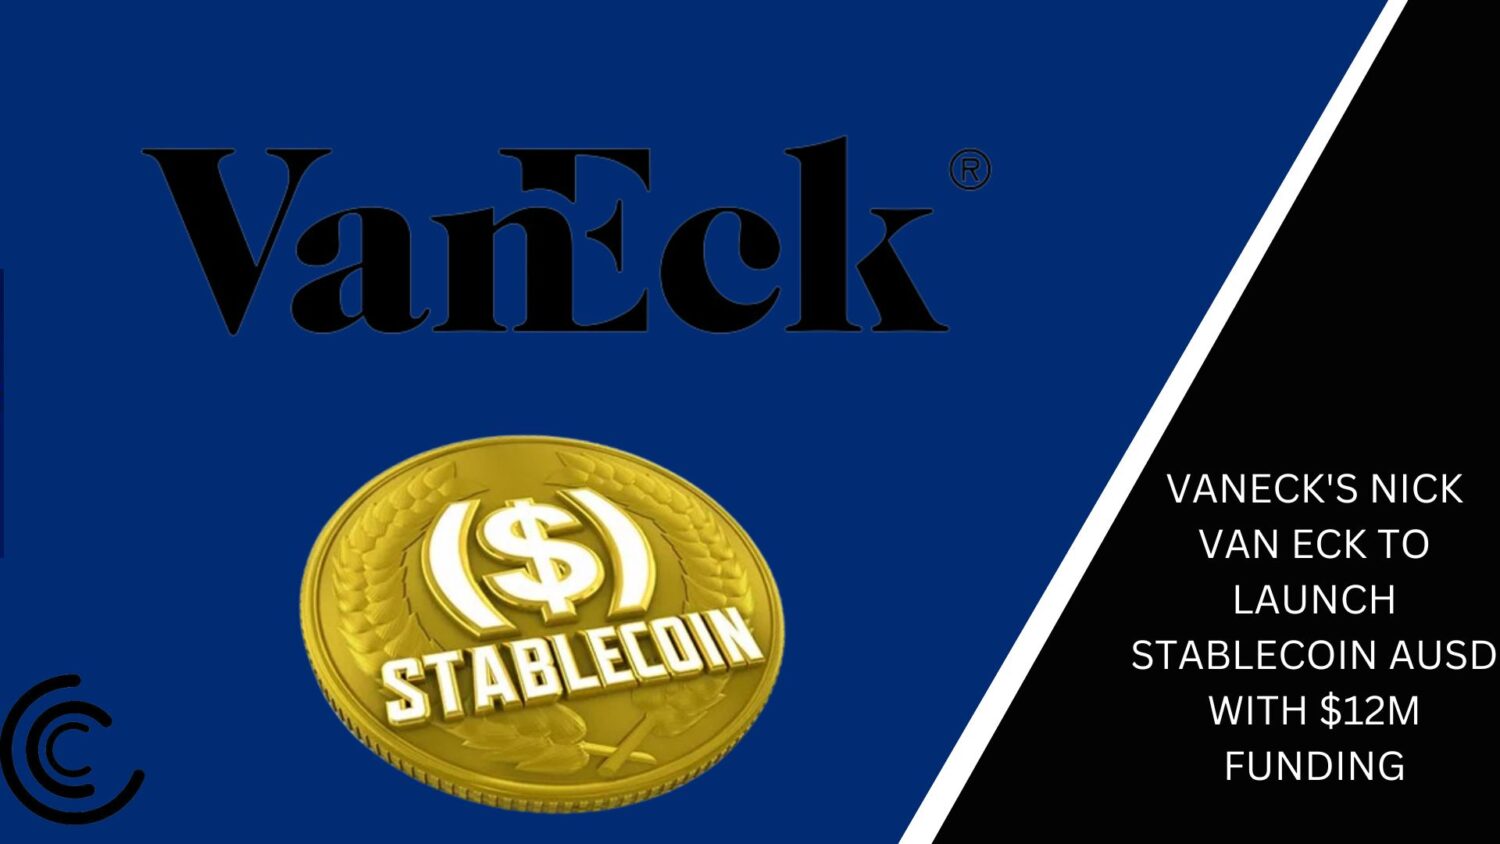 Vaneck'S Nick Van Eck To Launch New Stablecoin Ausd With $12M Funding